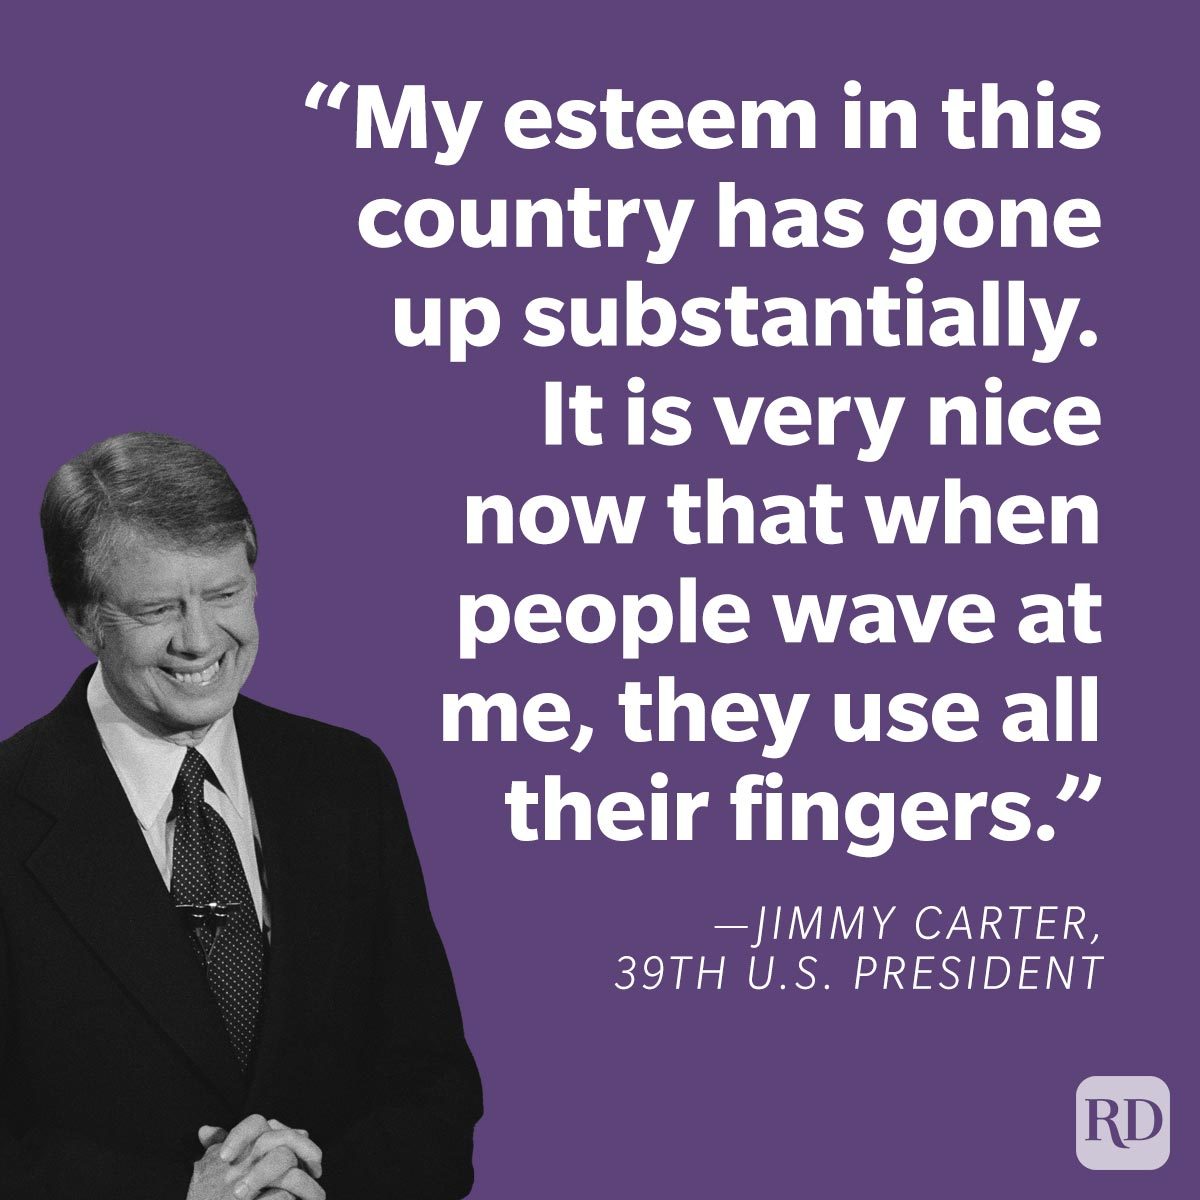 Presidential Jokes Told By U S Presidents “My esteem in this country has gone up substantially. It is very nice now that when people wave at me, they use all their fingers.” —Jimmy Carter, 39th U.S. president on purple background